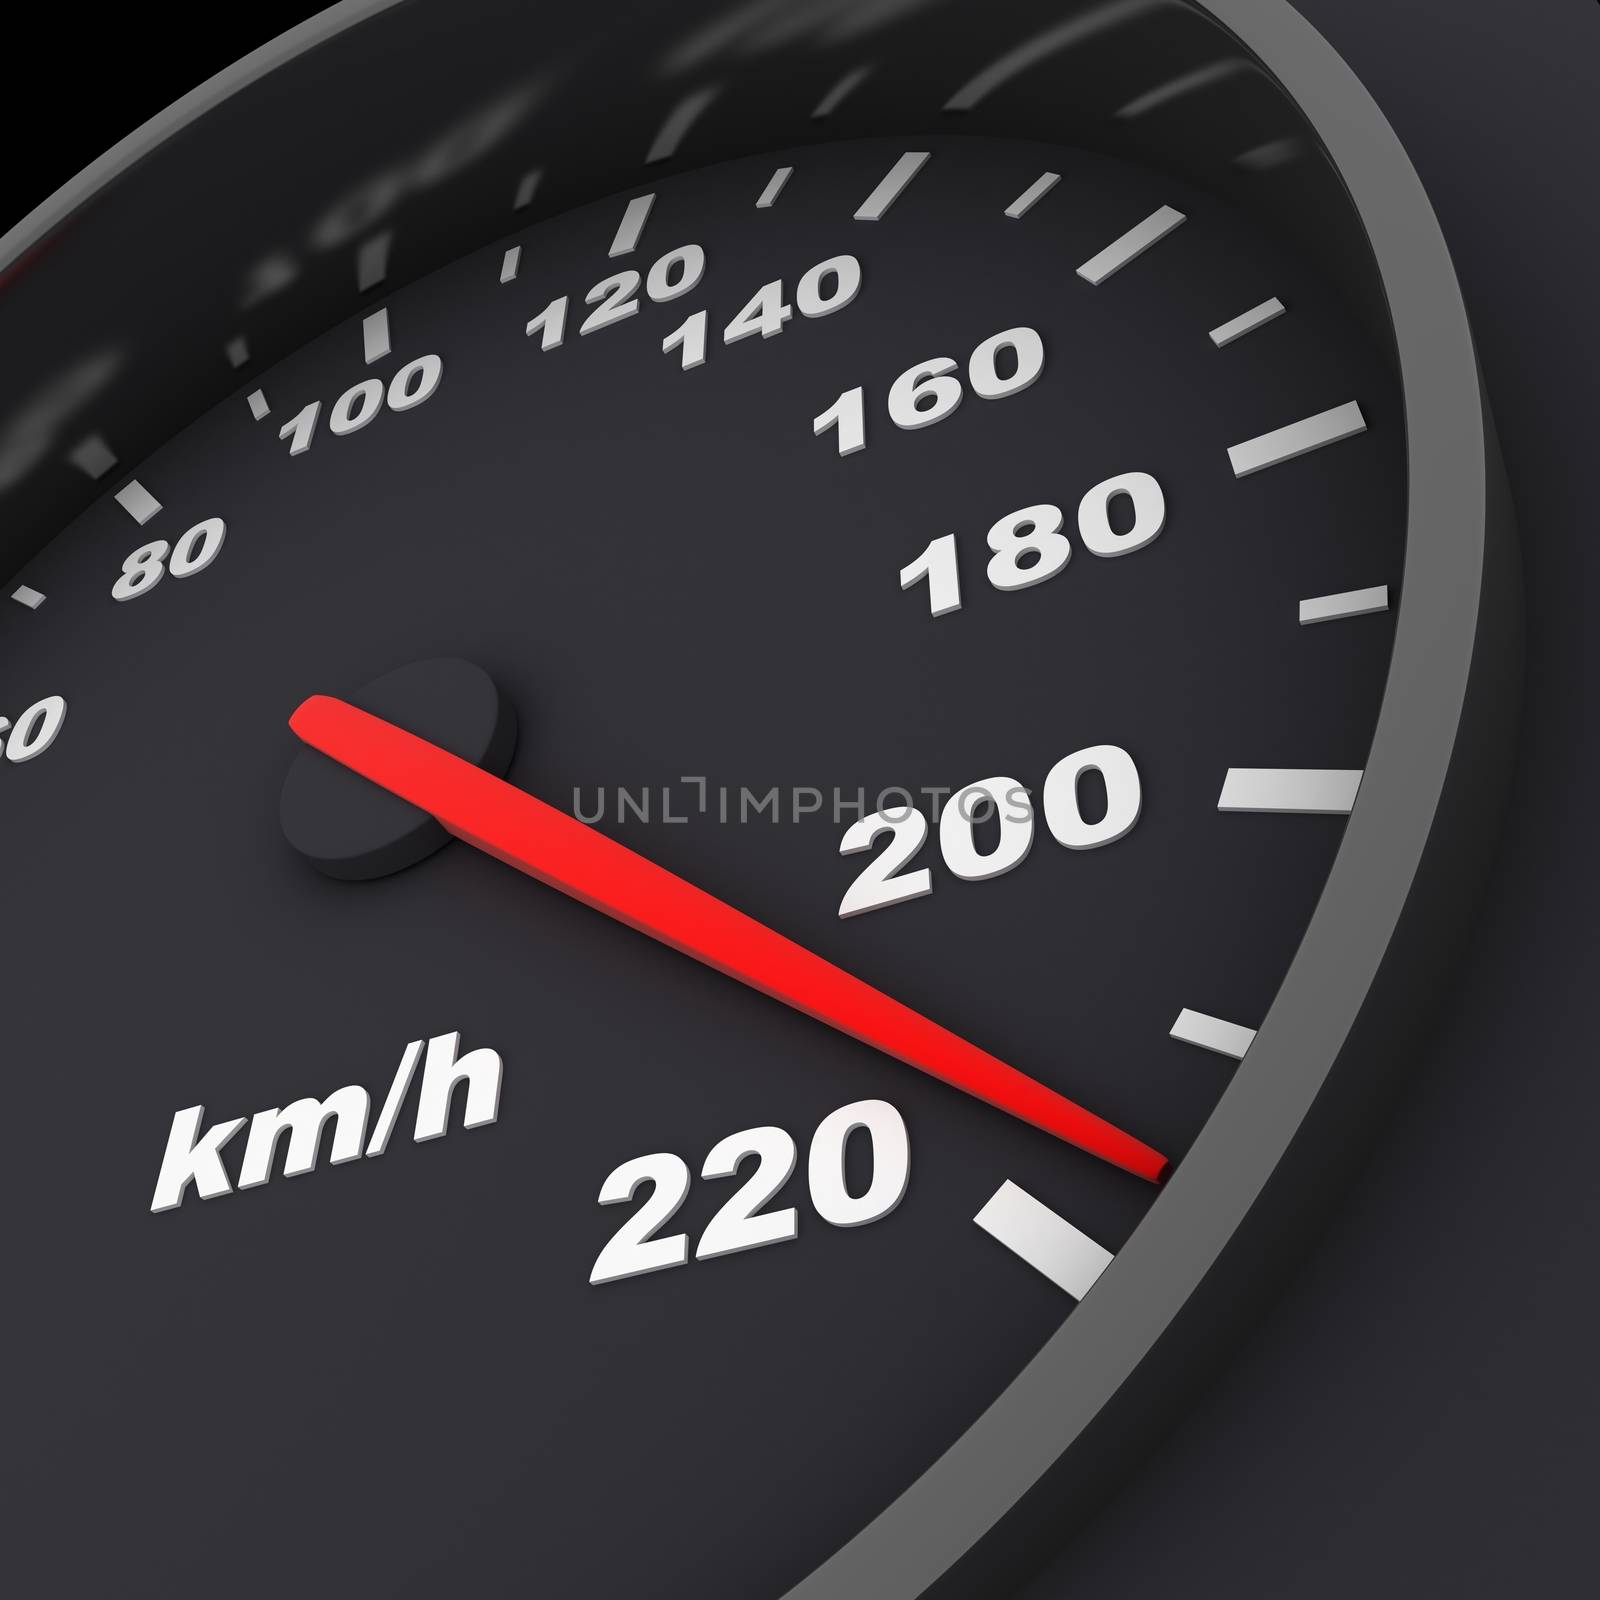 speedometer and arrow on 220 (done in 3d)